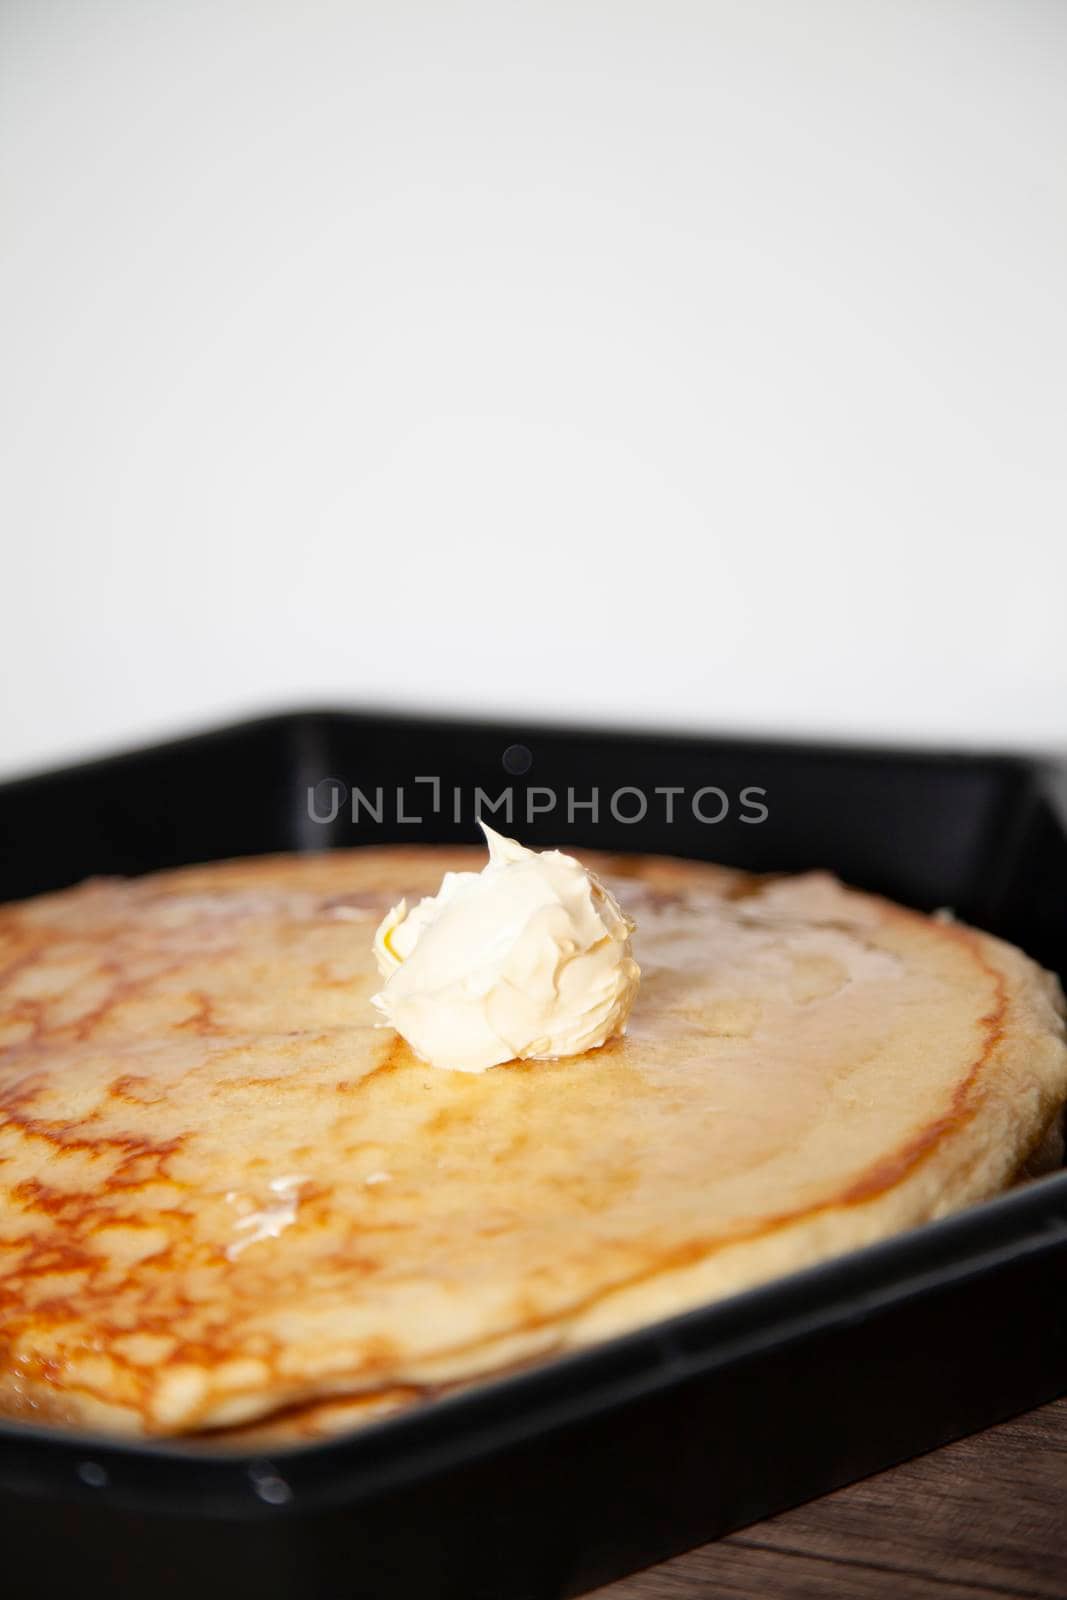 Two plain pancakes with butter and light syrup